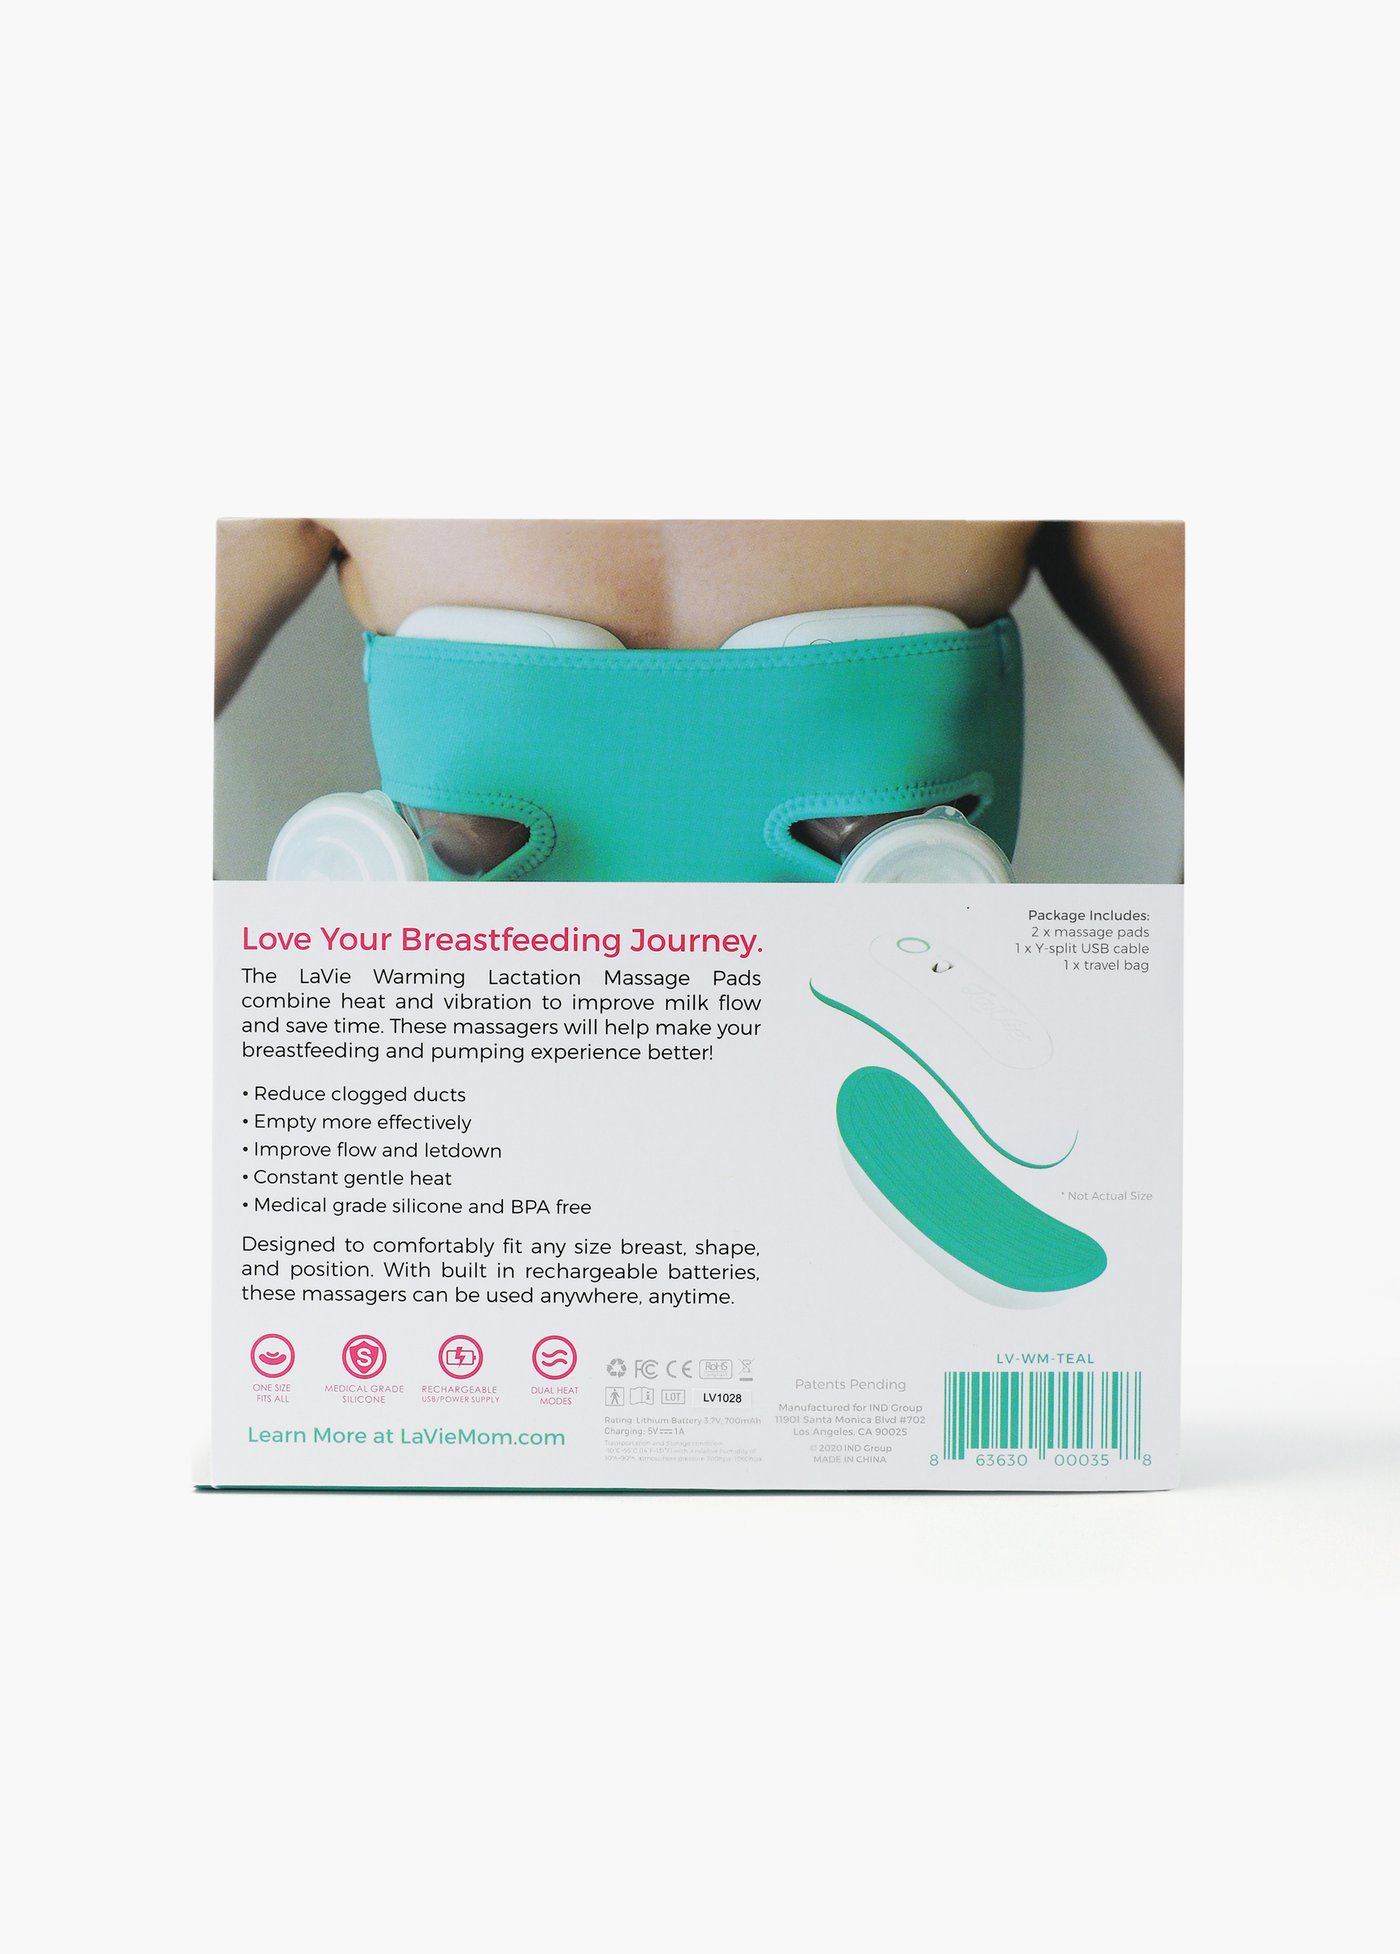 LaVie Warming Lactation Massager Pads, Breastfeeding Support to